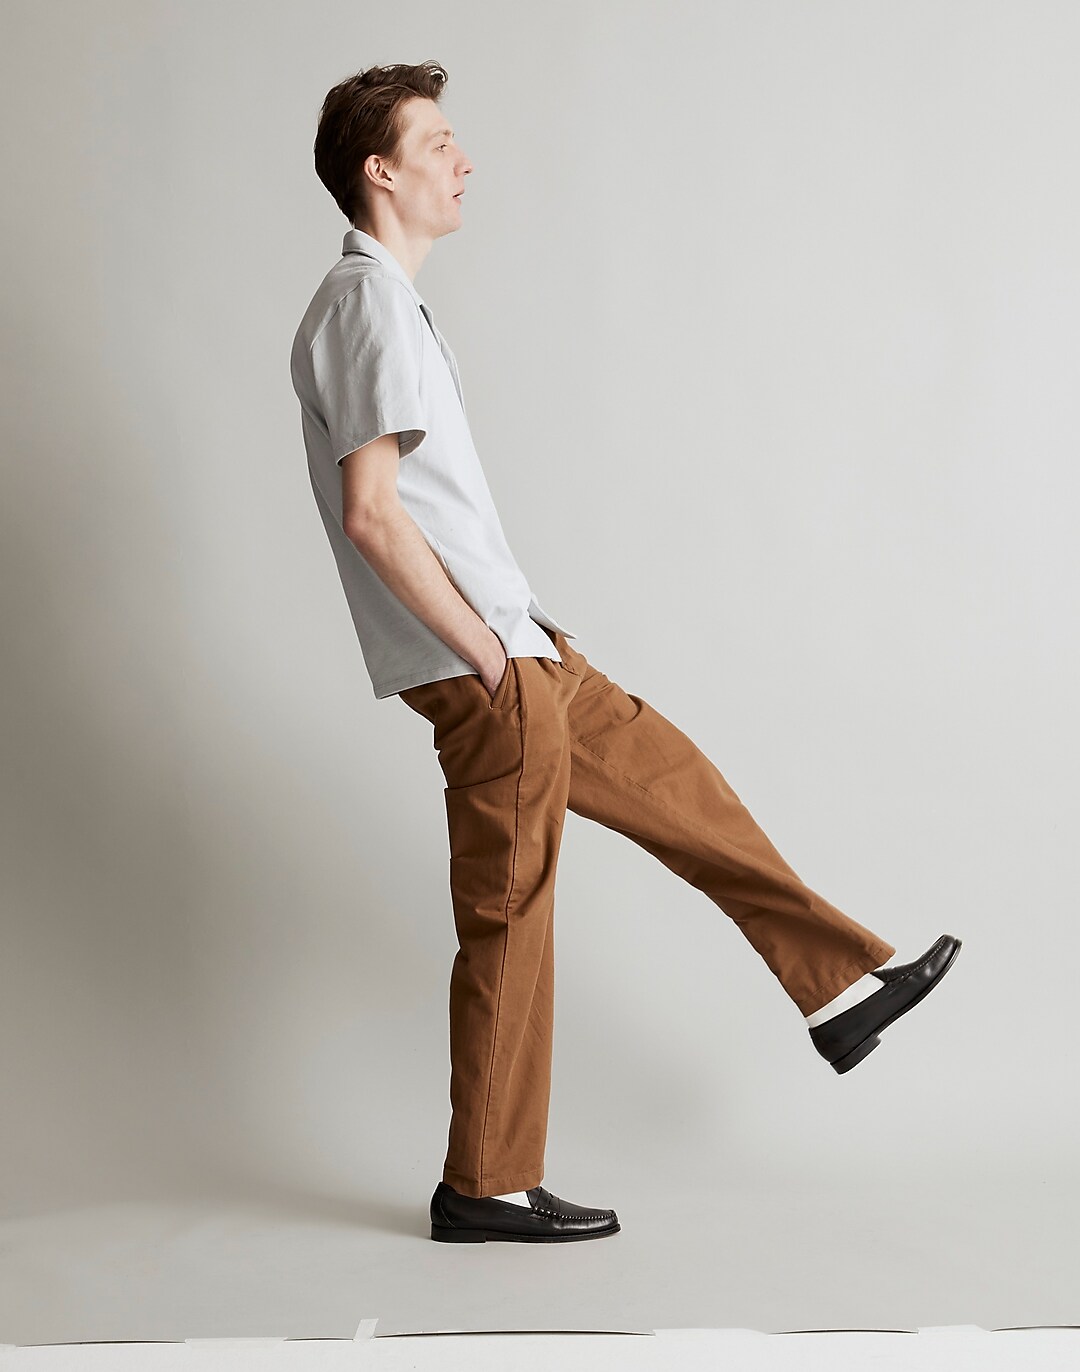 10 camp collar shirts for summer: Madewell, UNIQLO, and more - Reviewed